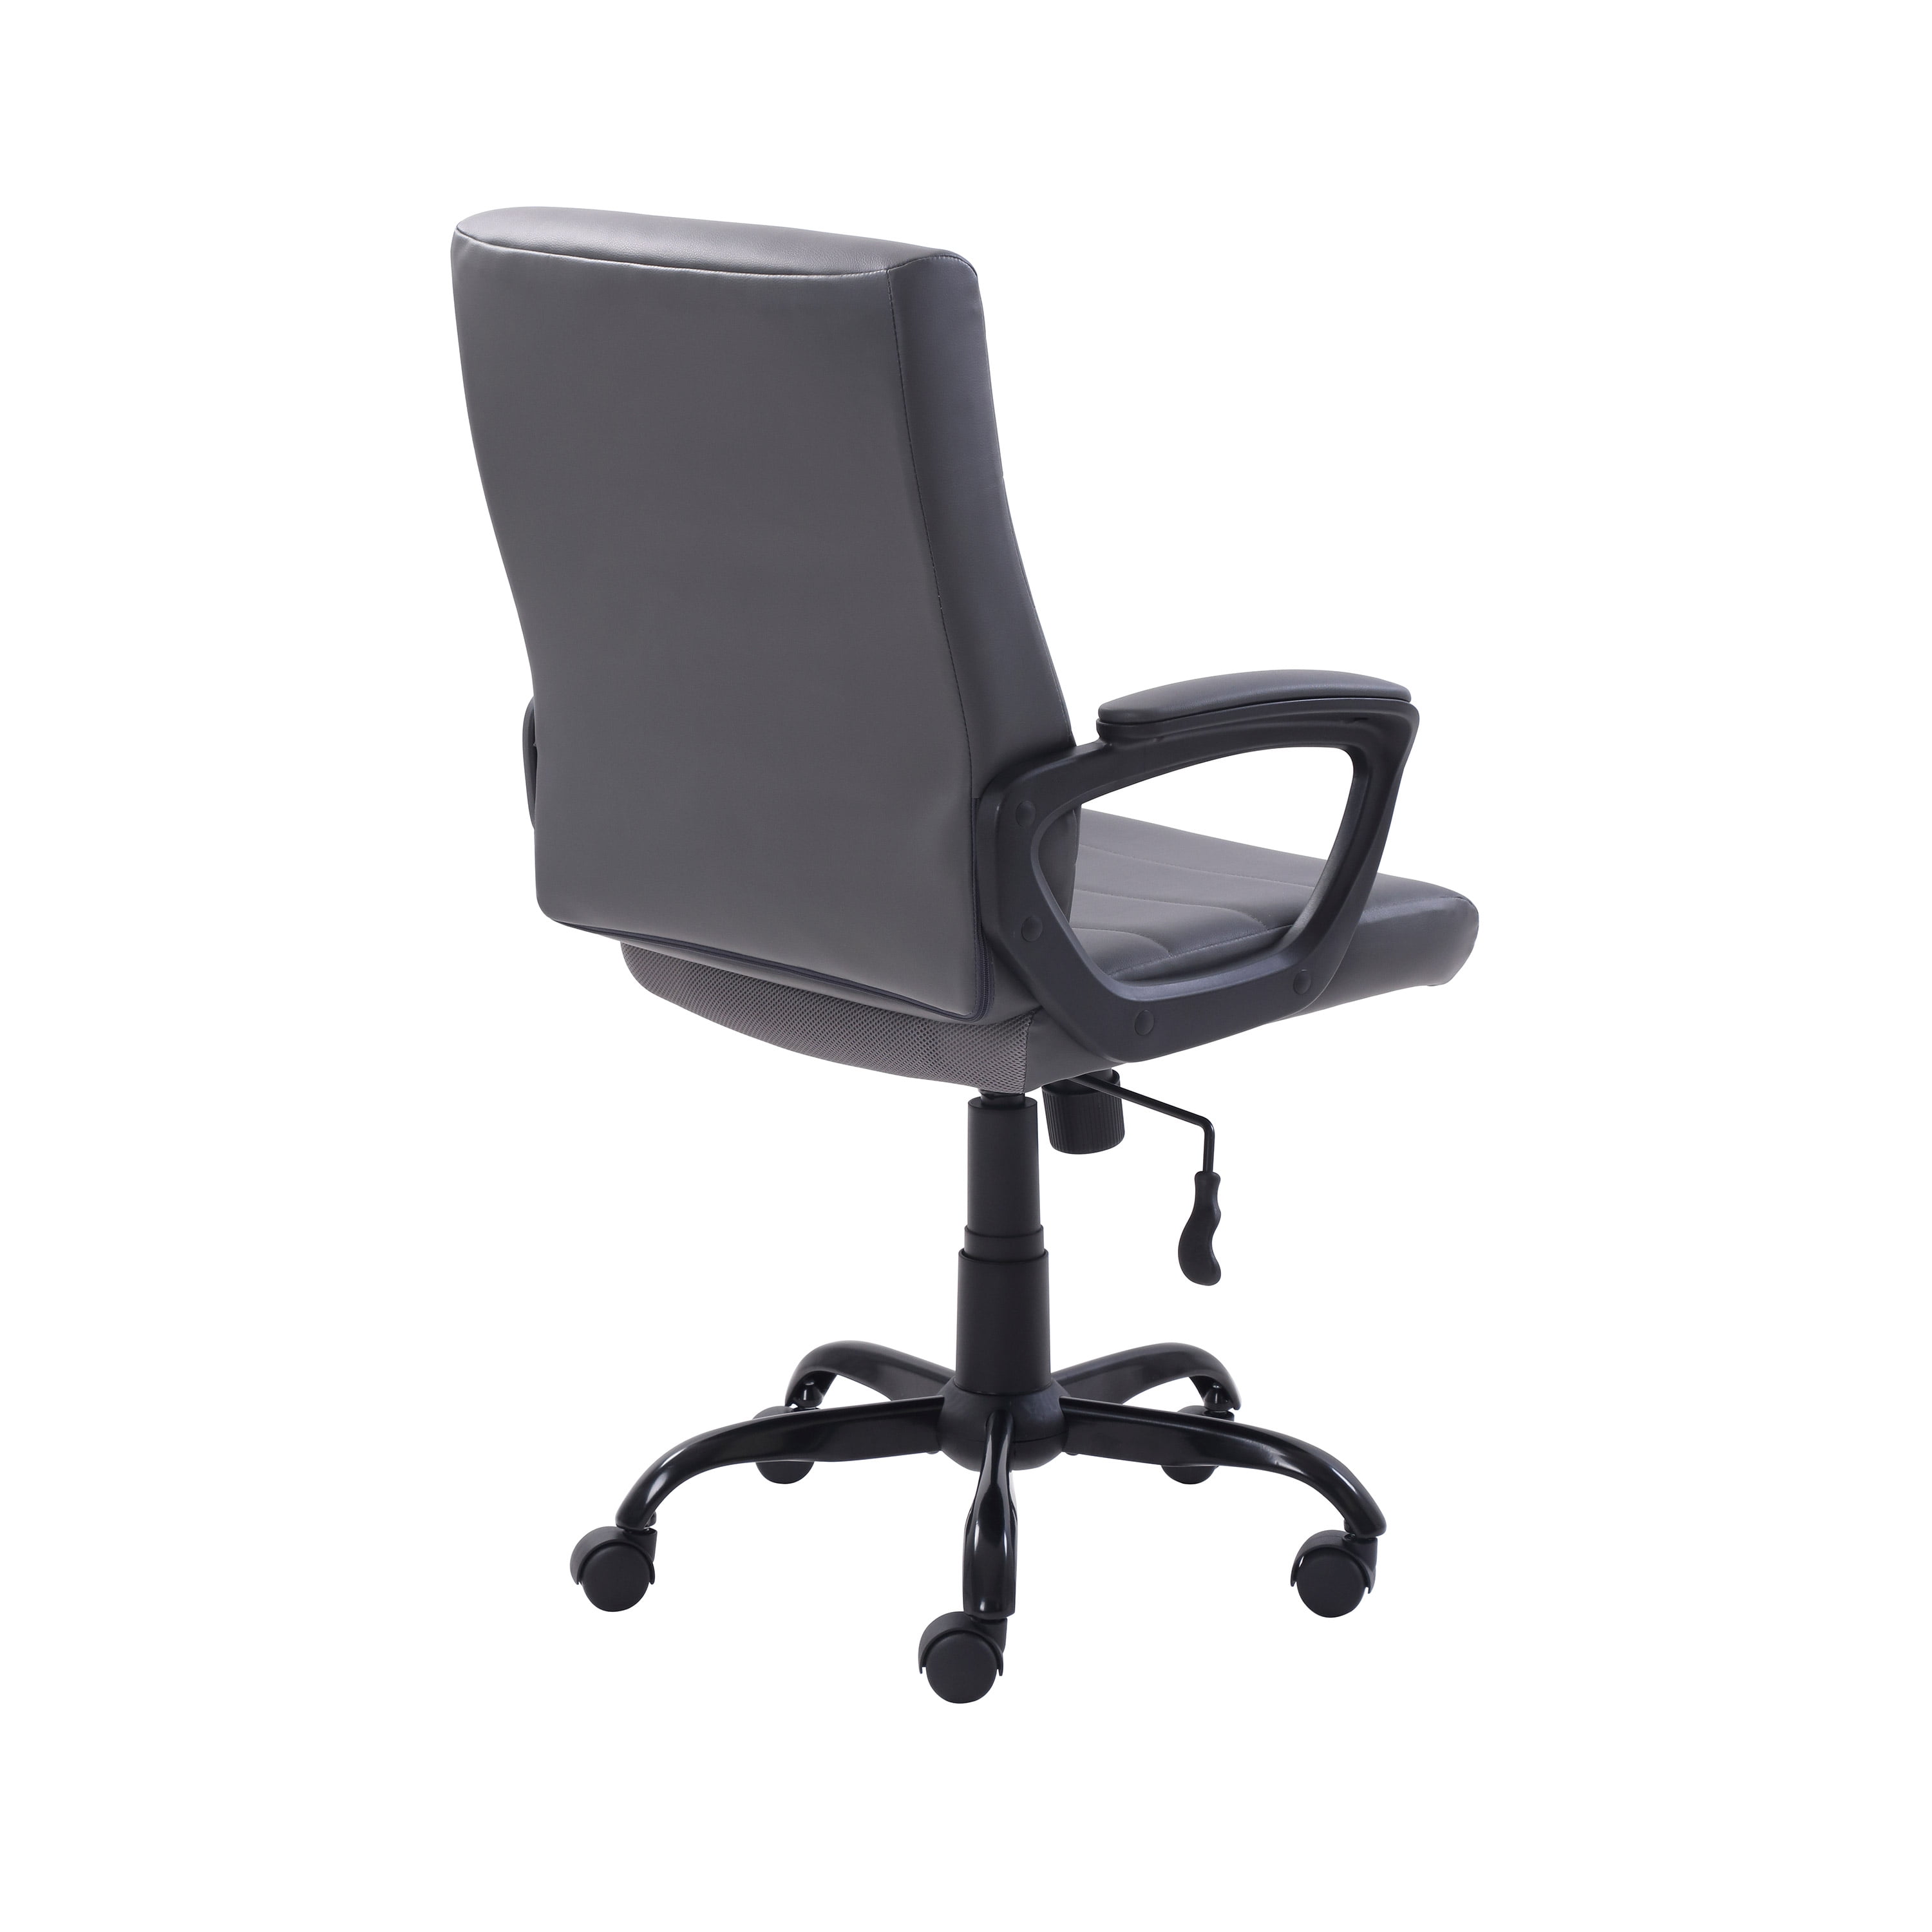 Bonded Leather Mid-back Managers Office Chair by Mainstays Gray for sale online 